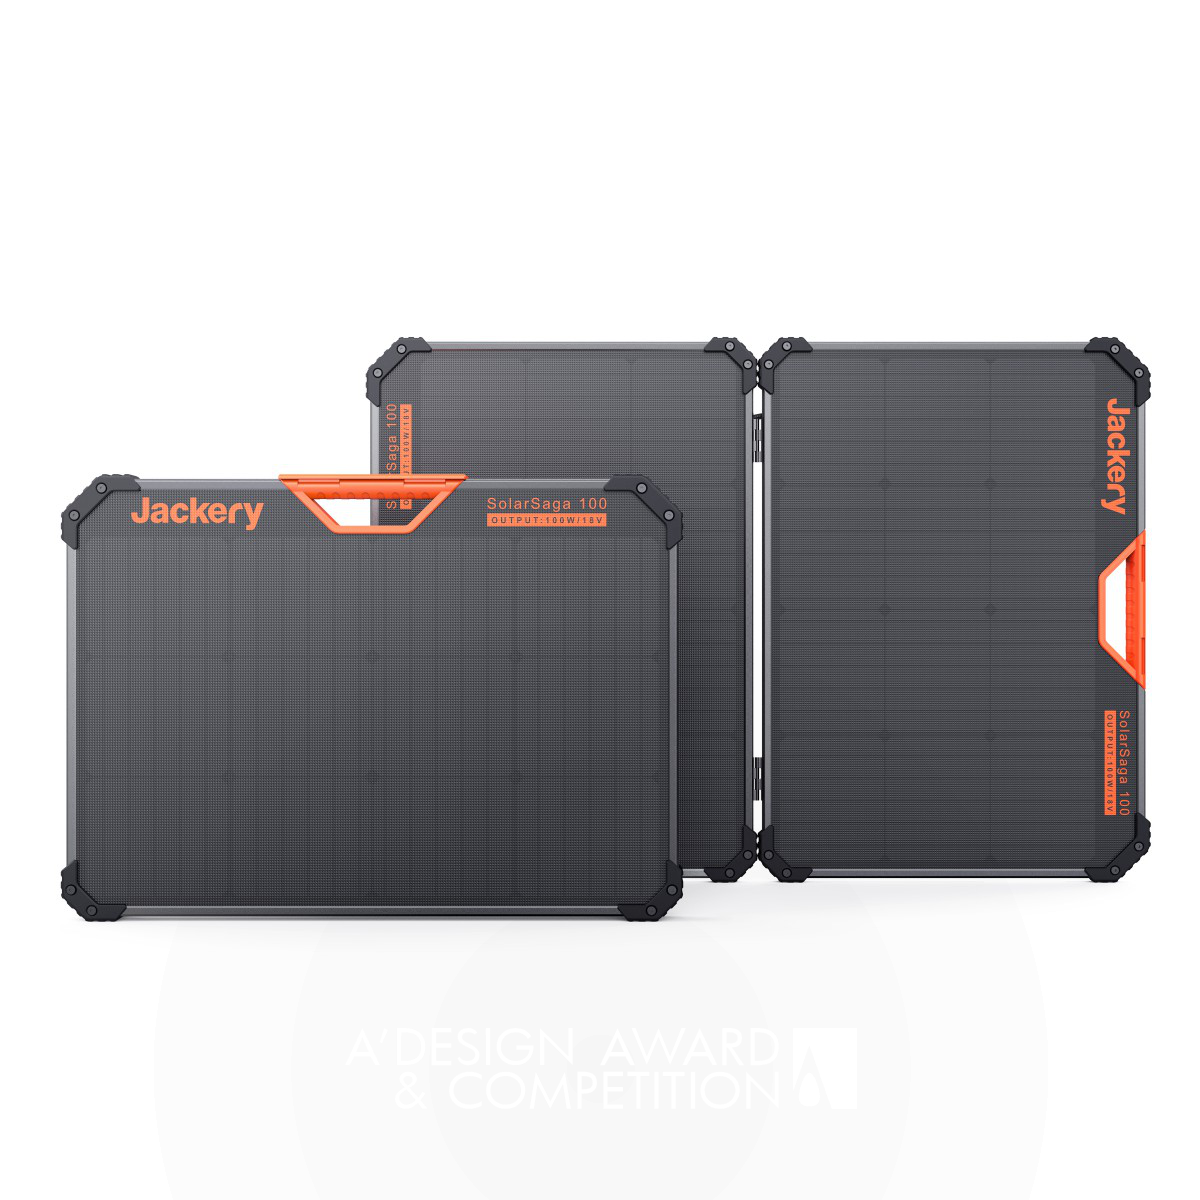 Shenzhen Hello Tech Energy Co.,Ltd wins Golden at the prestigious A' Energy Products, Projects and Devices Design Award with Jackery Solar Panel Set.